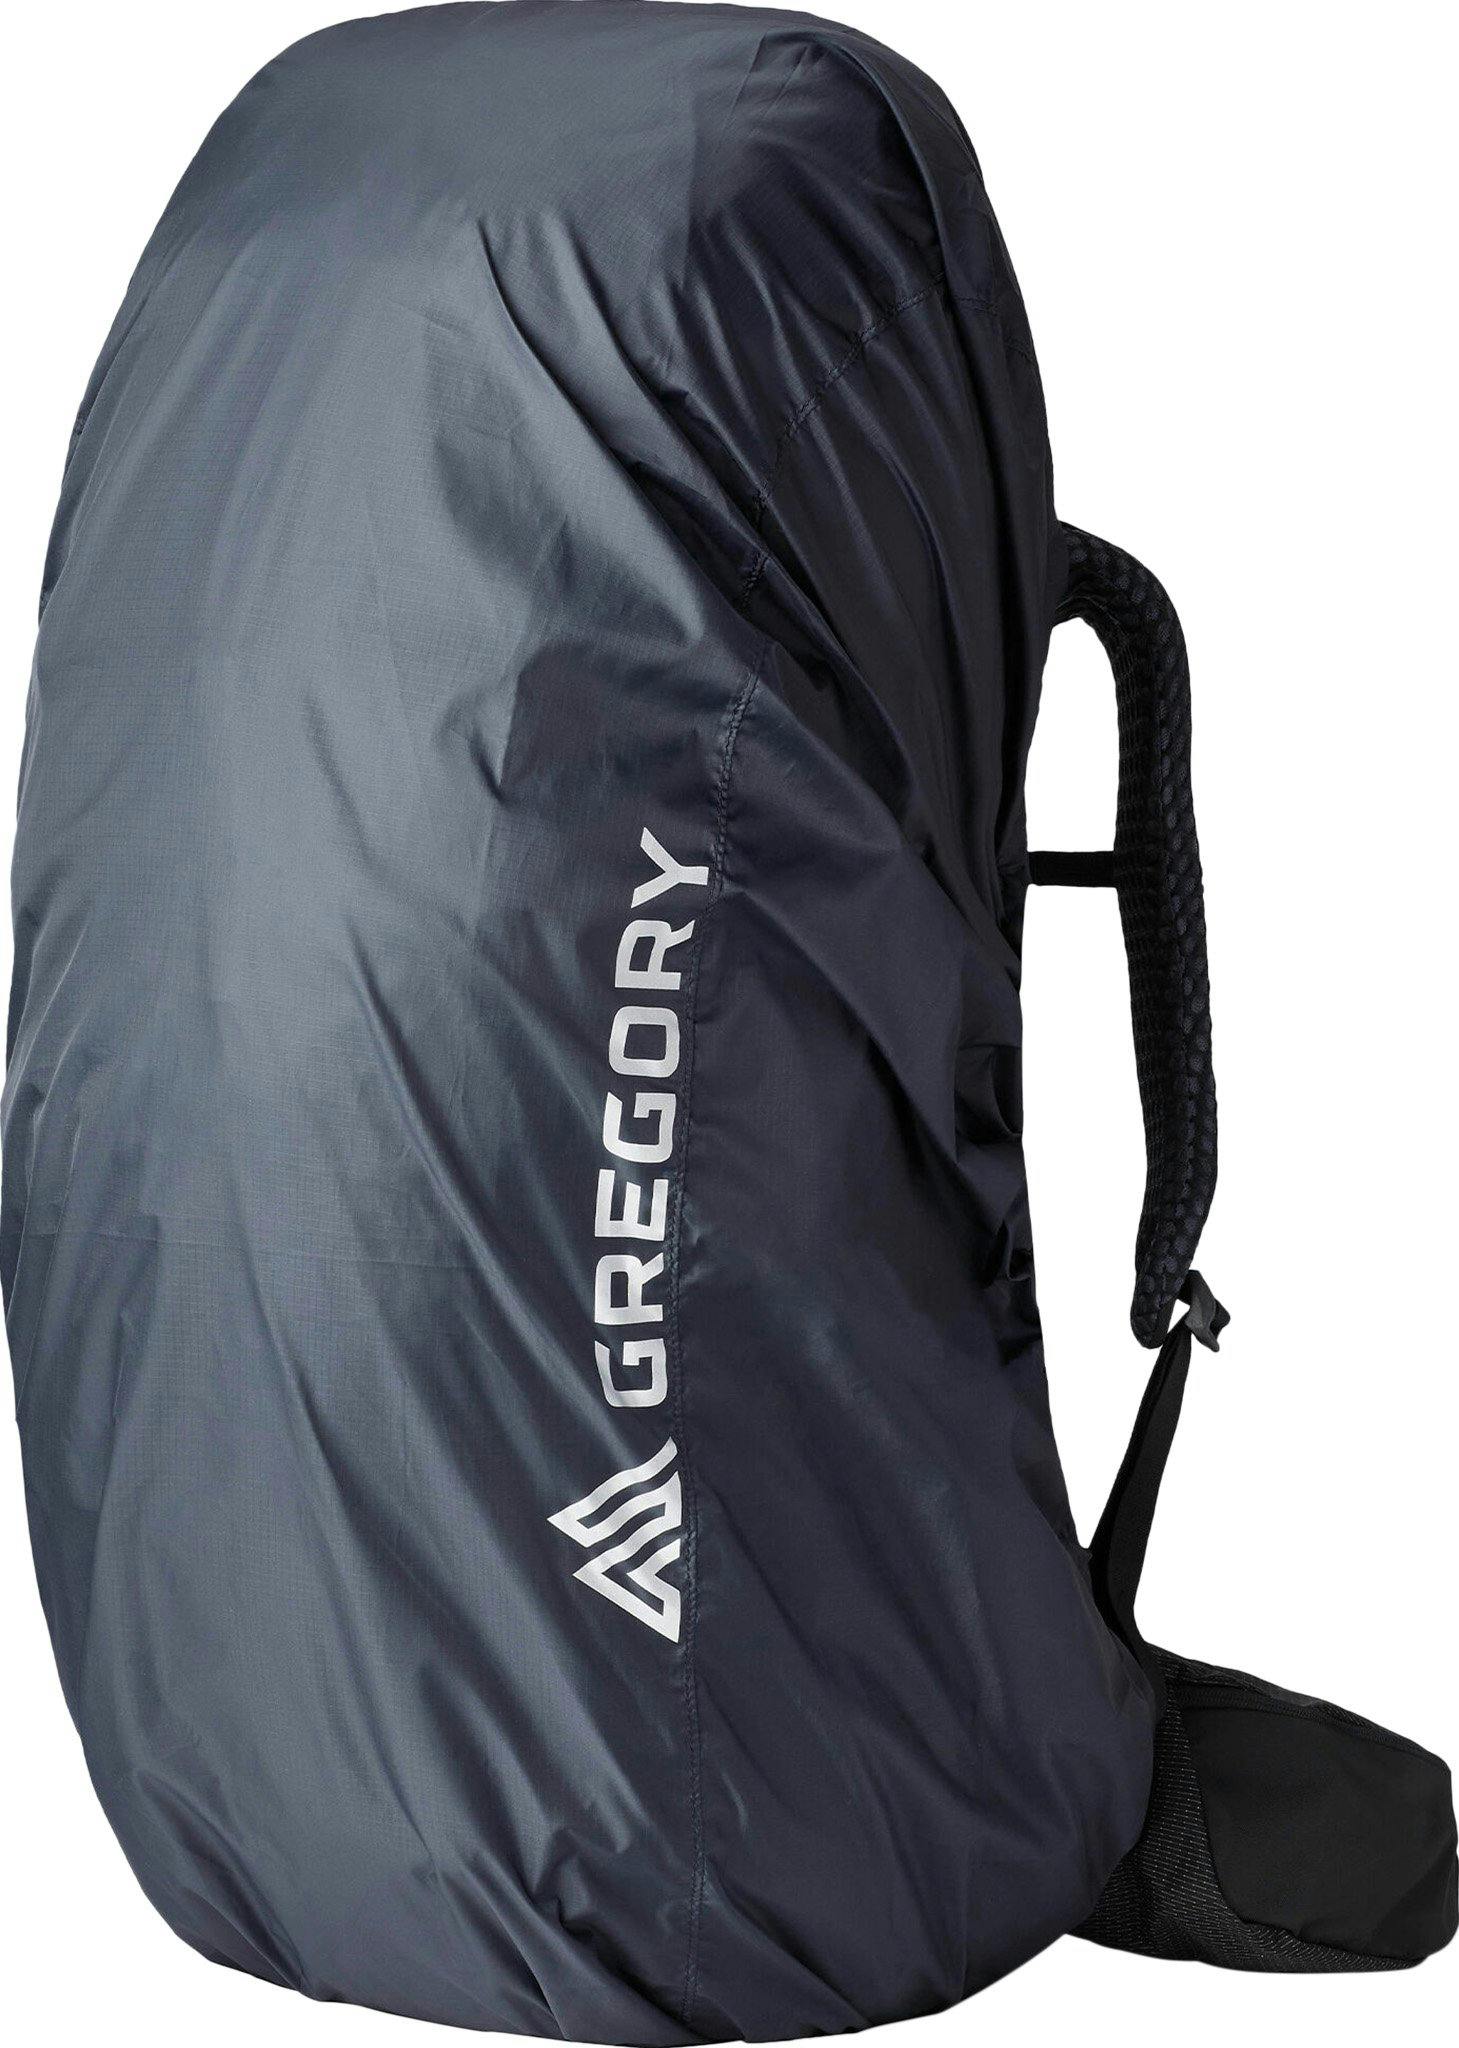 Product image for Raincover 80L-110L